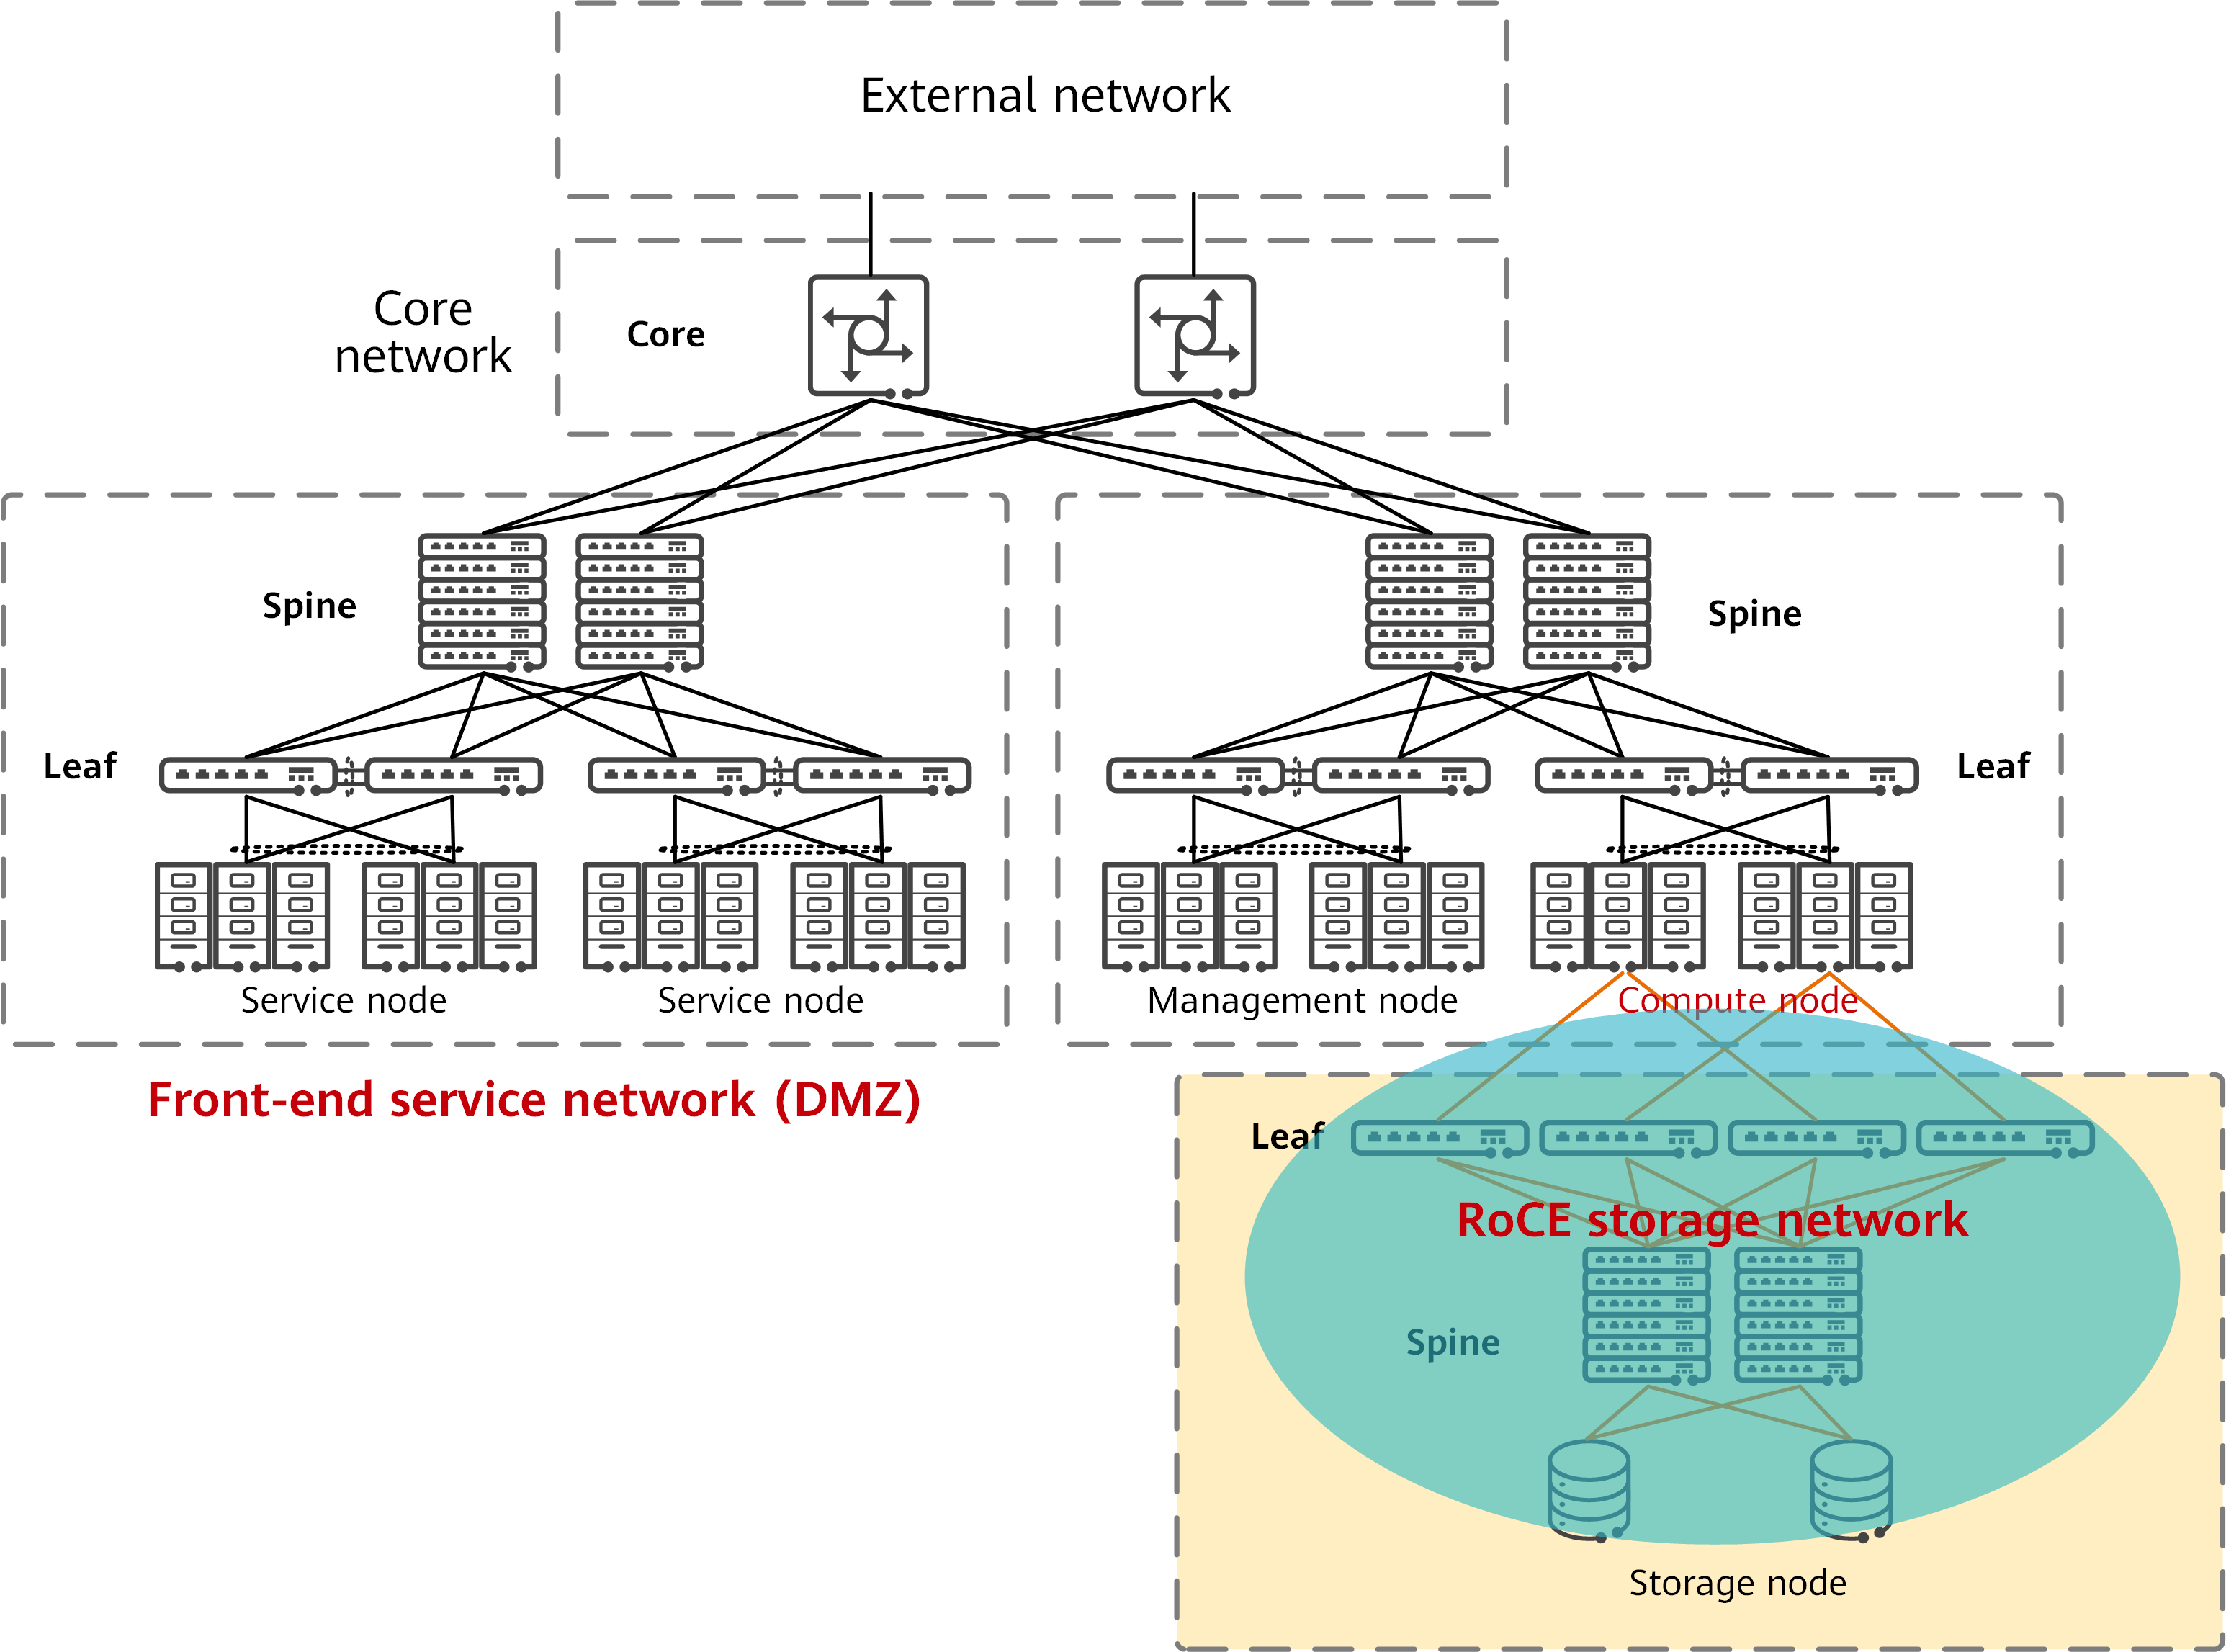 Centralized storage network architecture of a DC